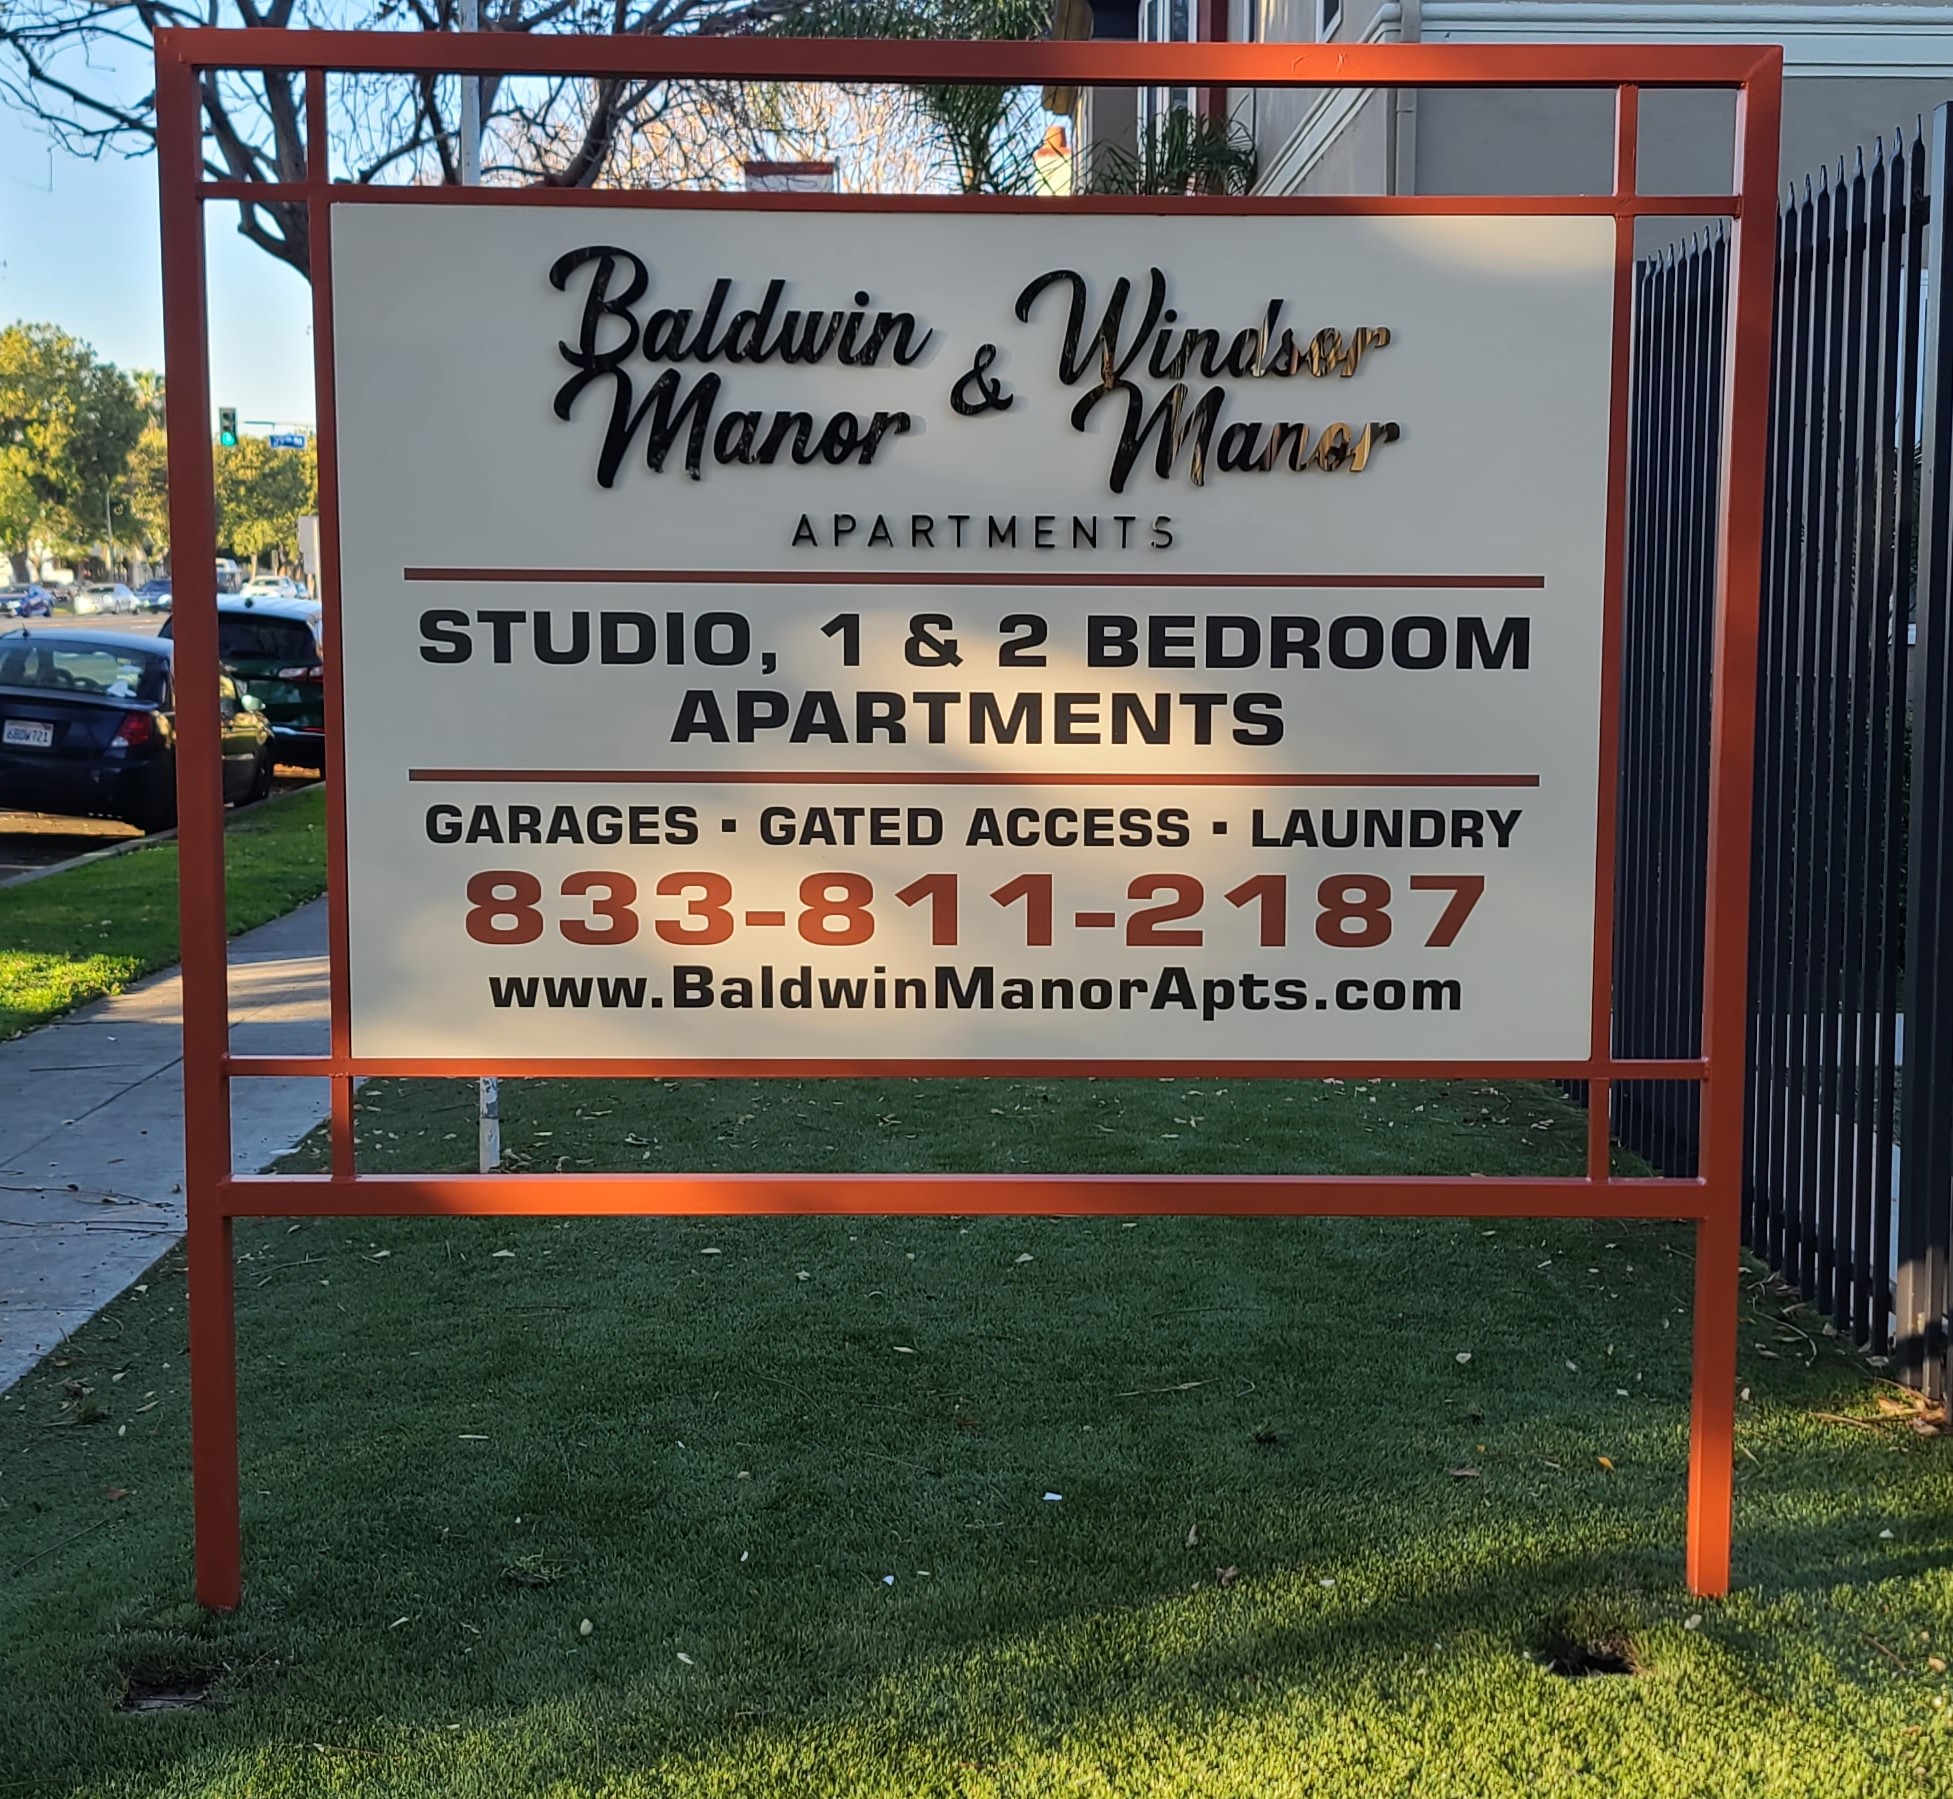 This is the apartment monument sign for Jones and Jones in Los Angeles. It advertises Baldwin Manor and Windsor Manor apartments.